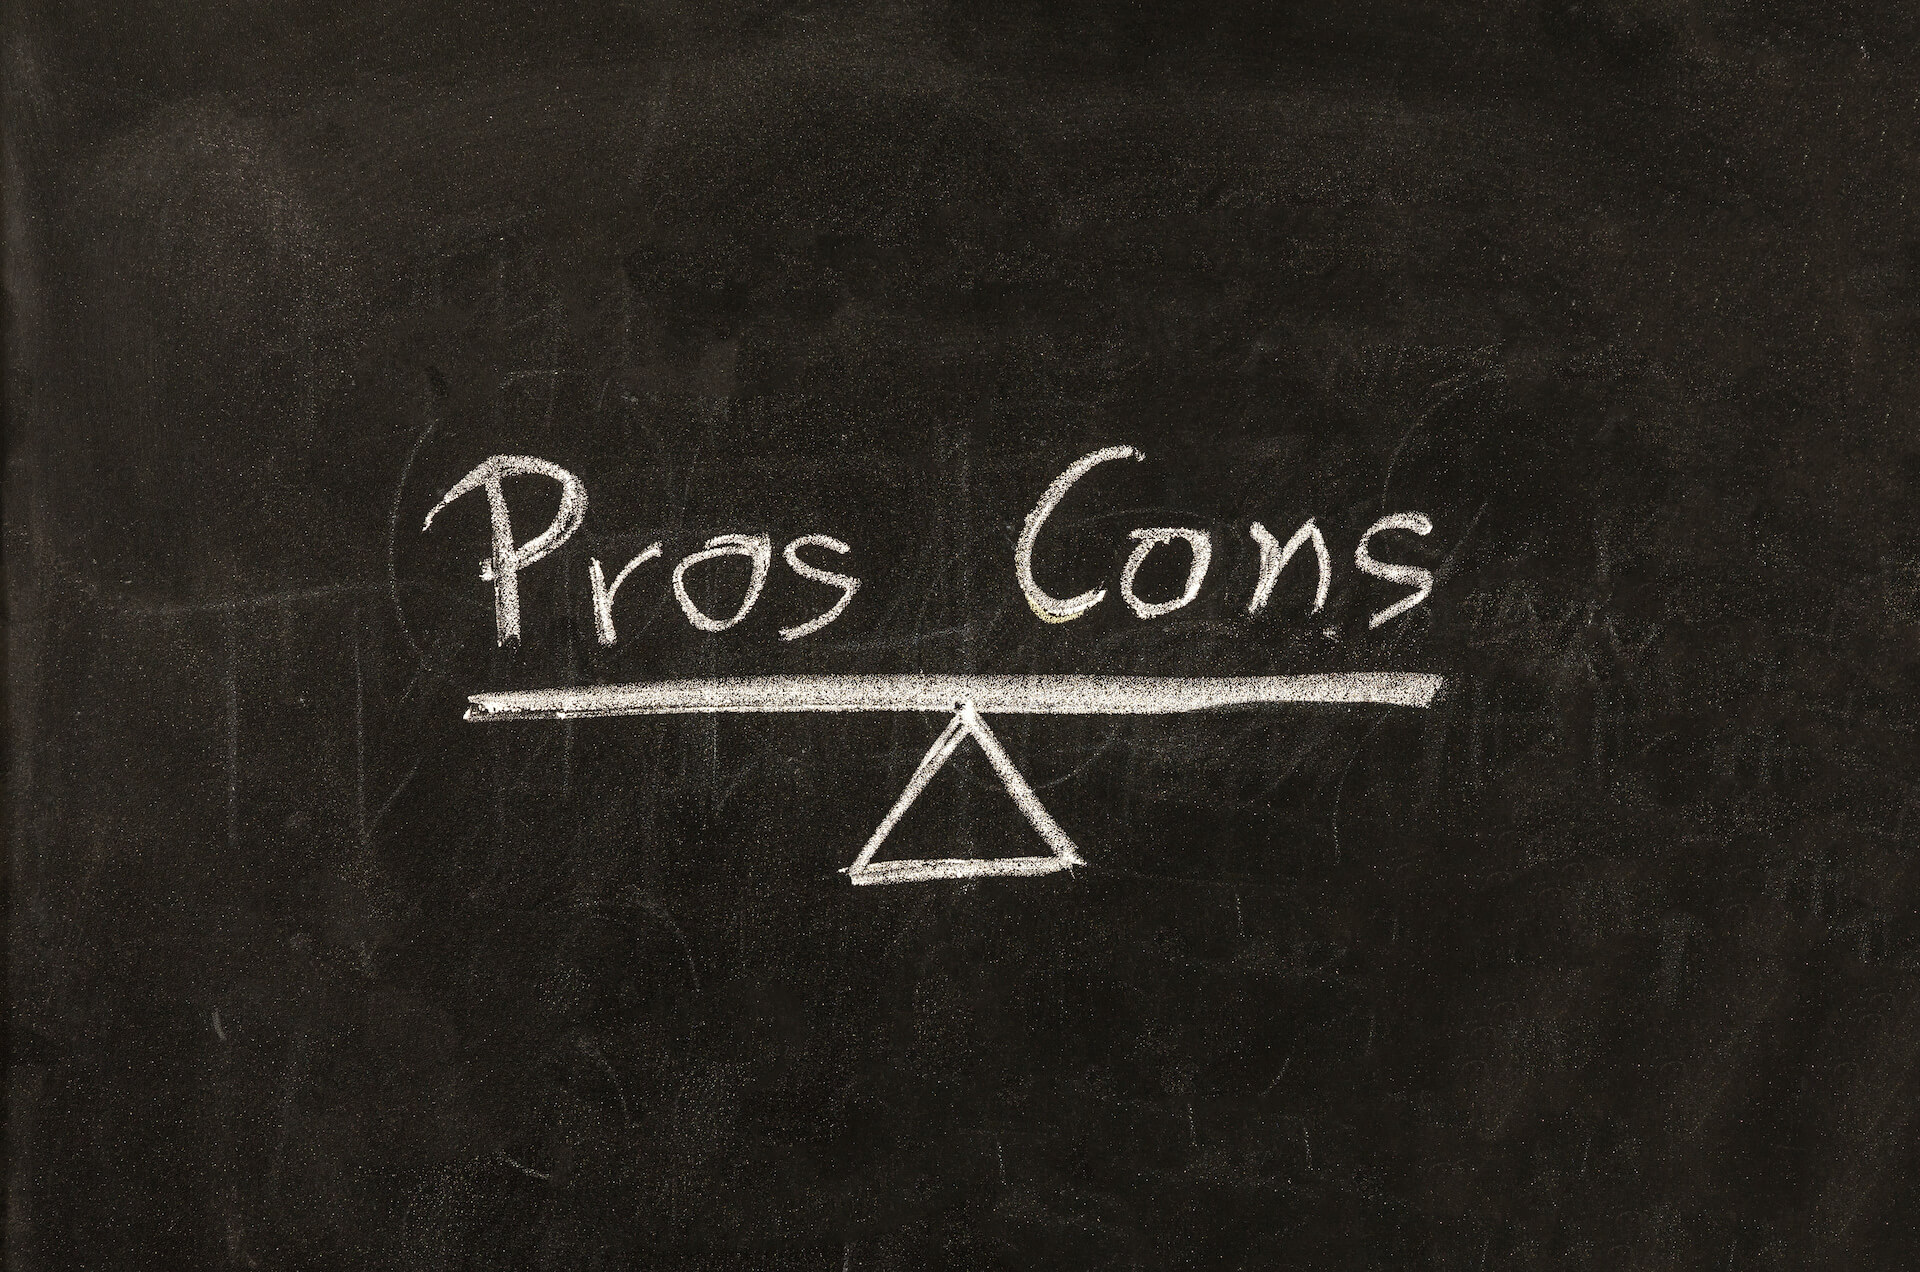 Pros and cons scale sign